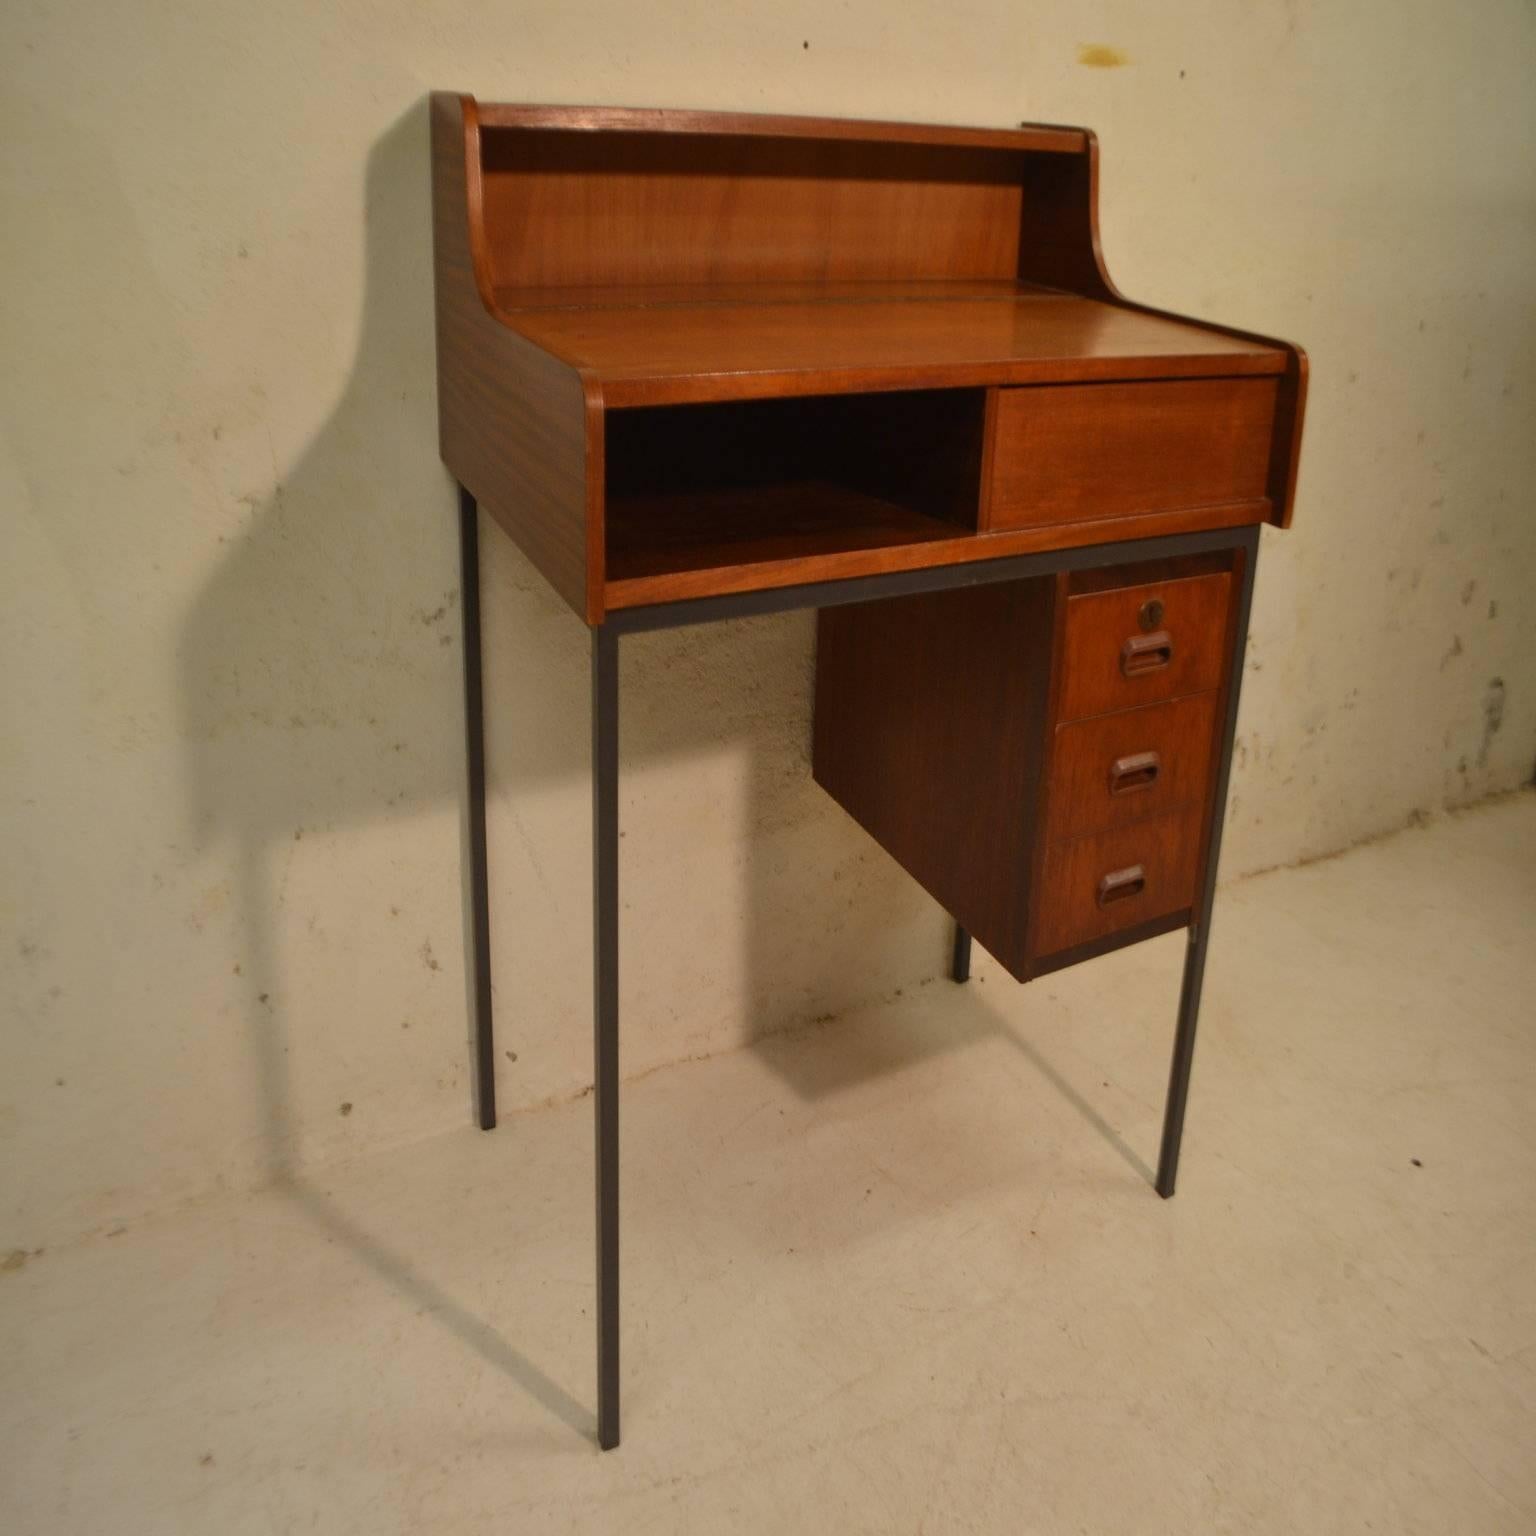 Teak and metal writing desk designed by Cees Braakman for Pastoe, Holland.